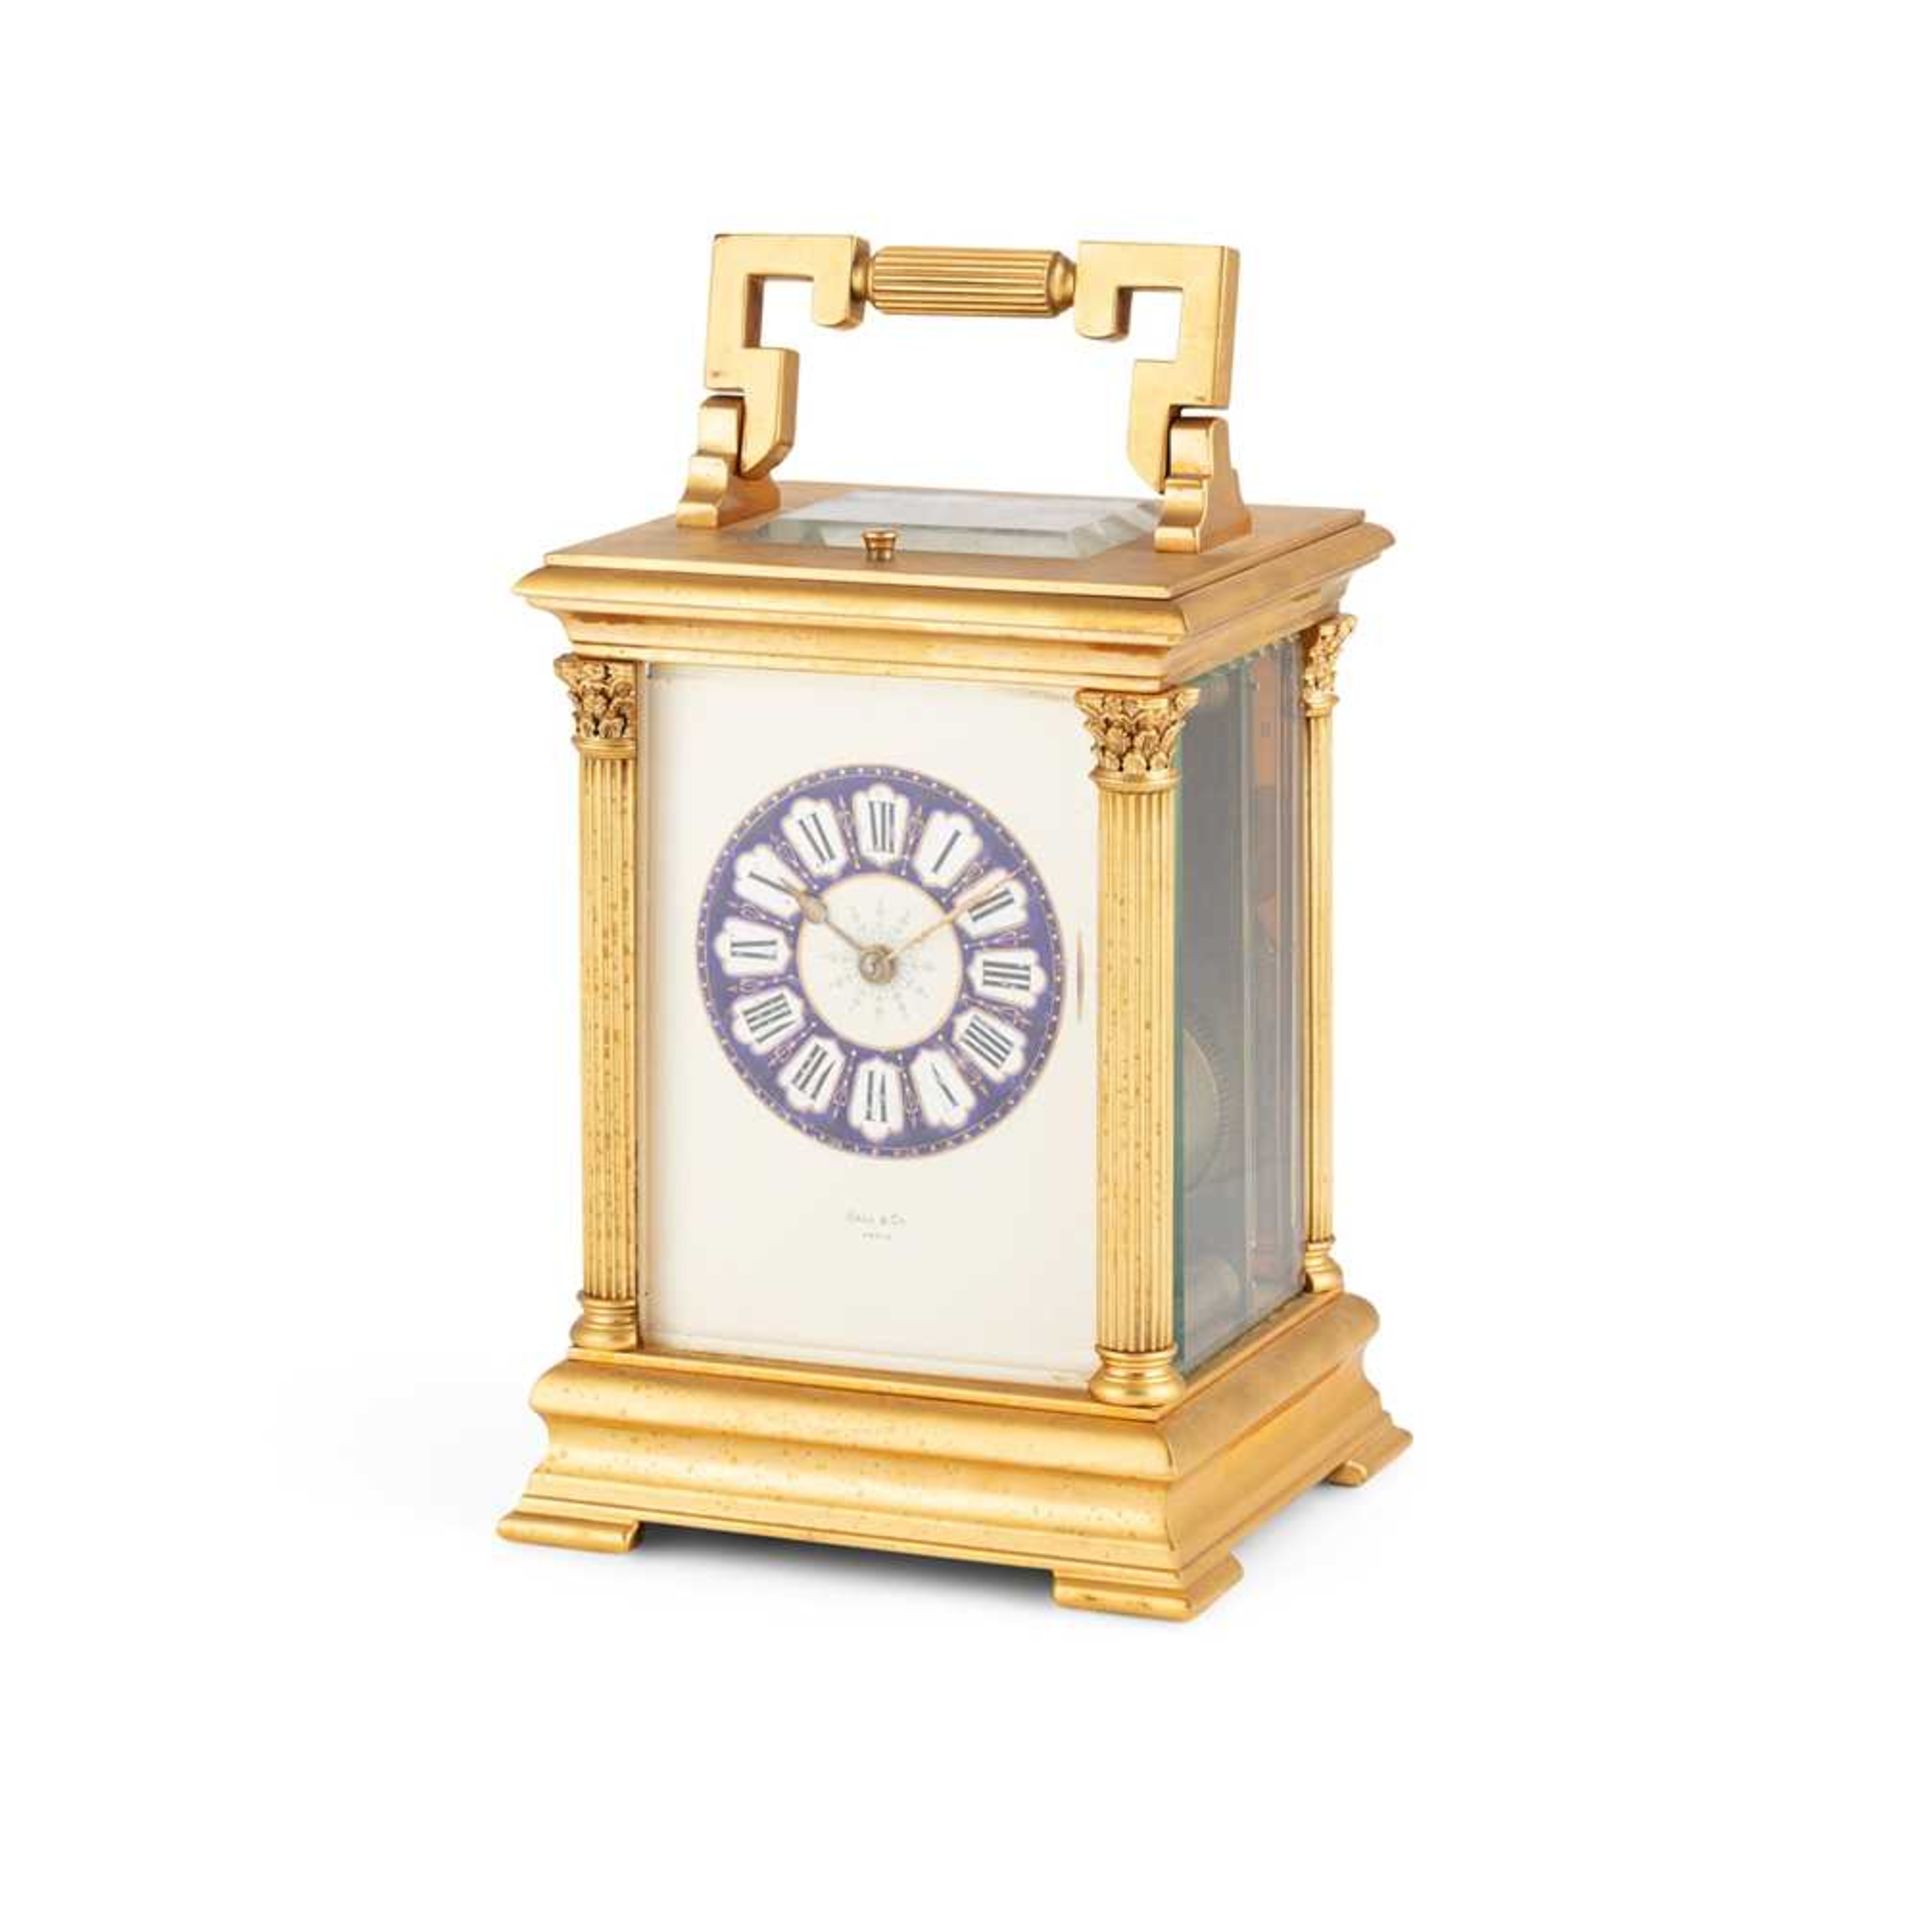 FRENCH BRASS AND ENAMEL REPEATER CARRIAGE CLOCK LATE 19TH CENTURY